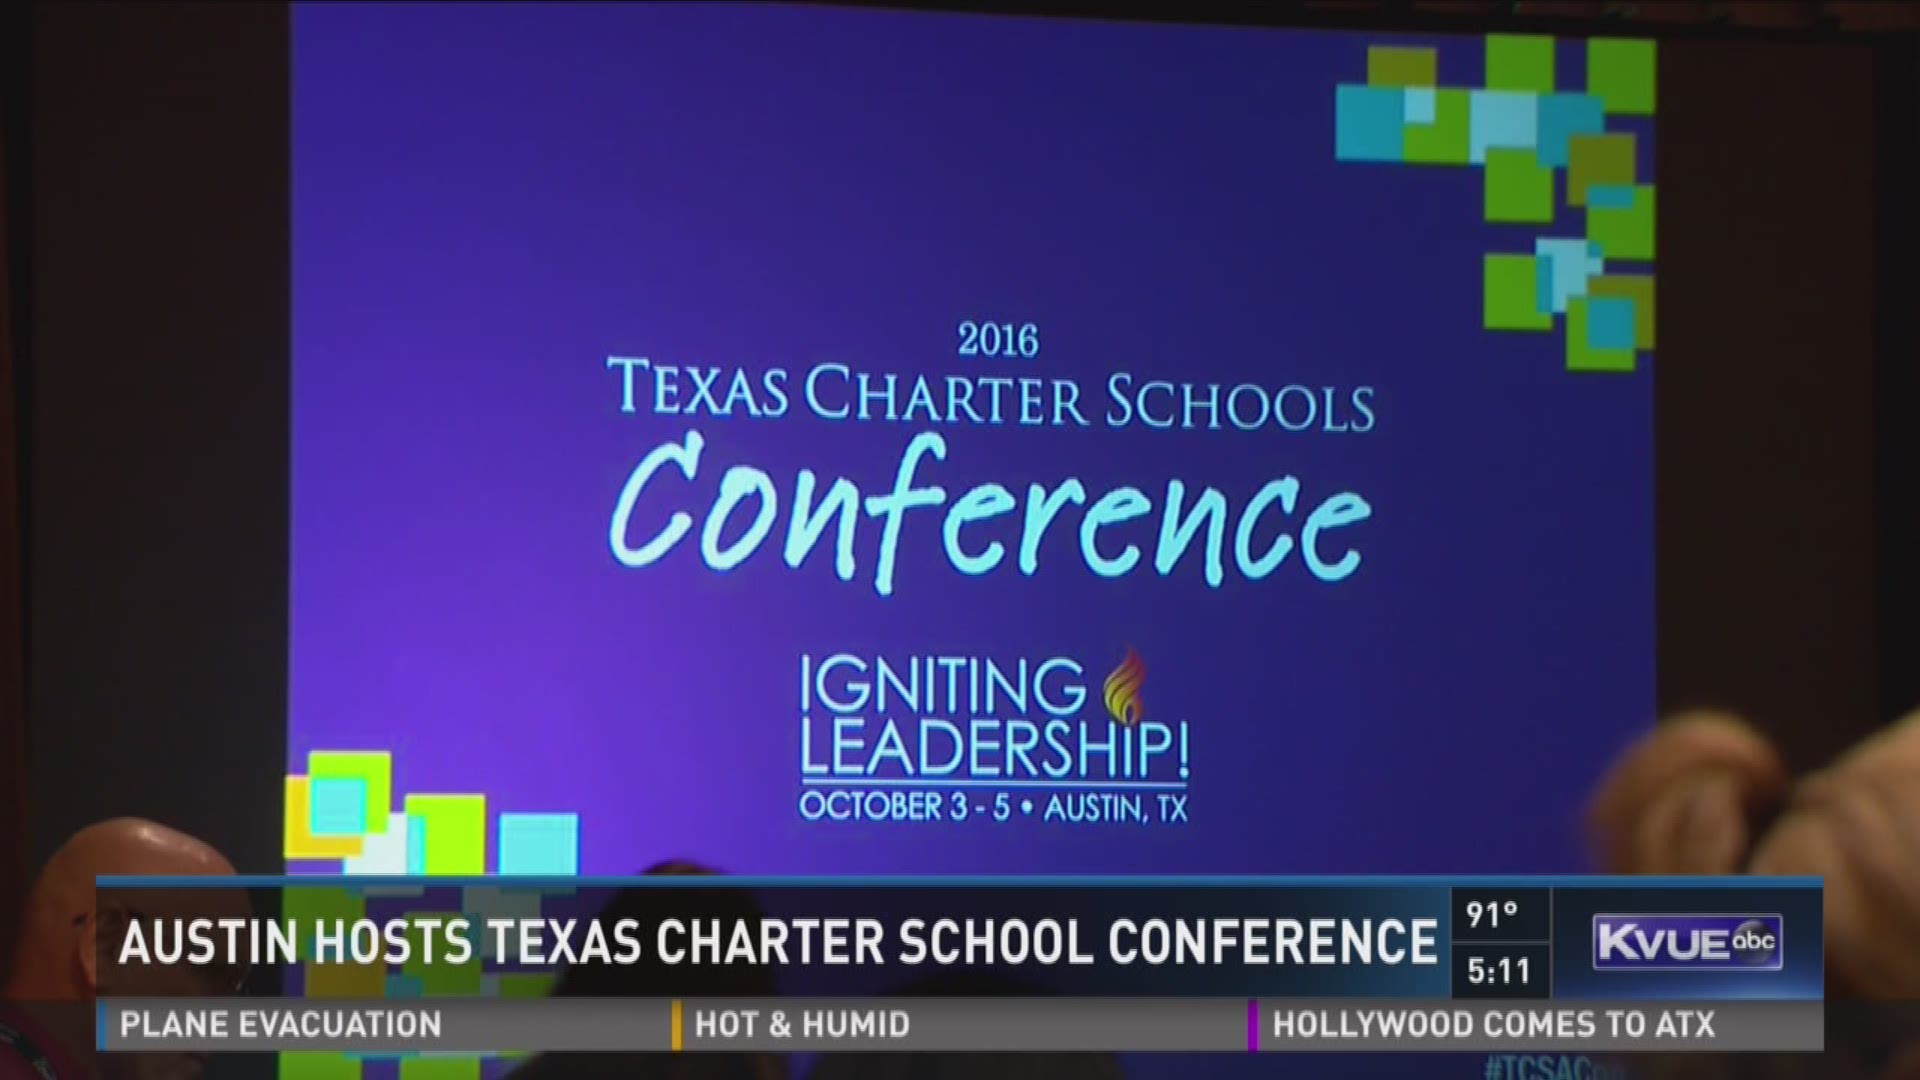 Austin hosts Texas Charter School Conference